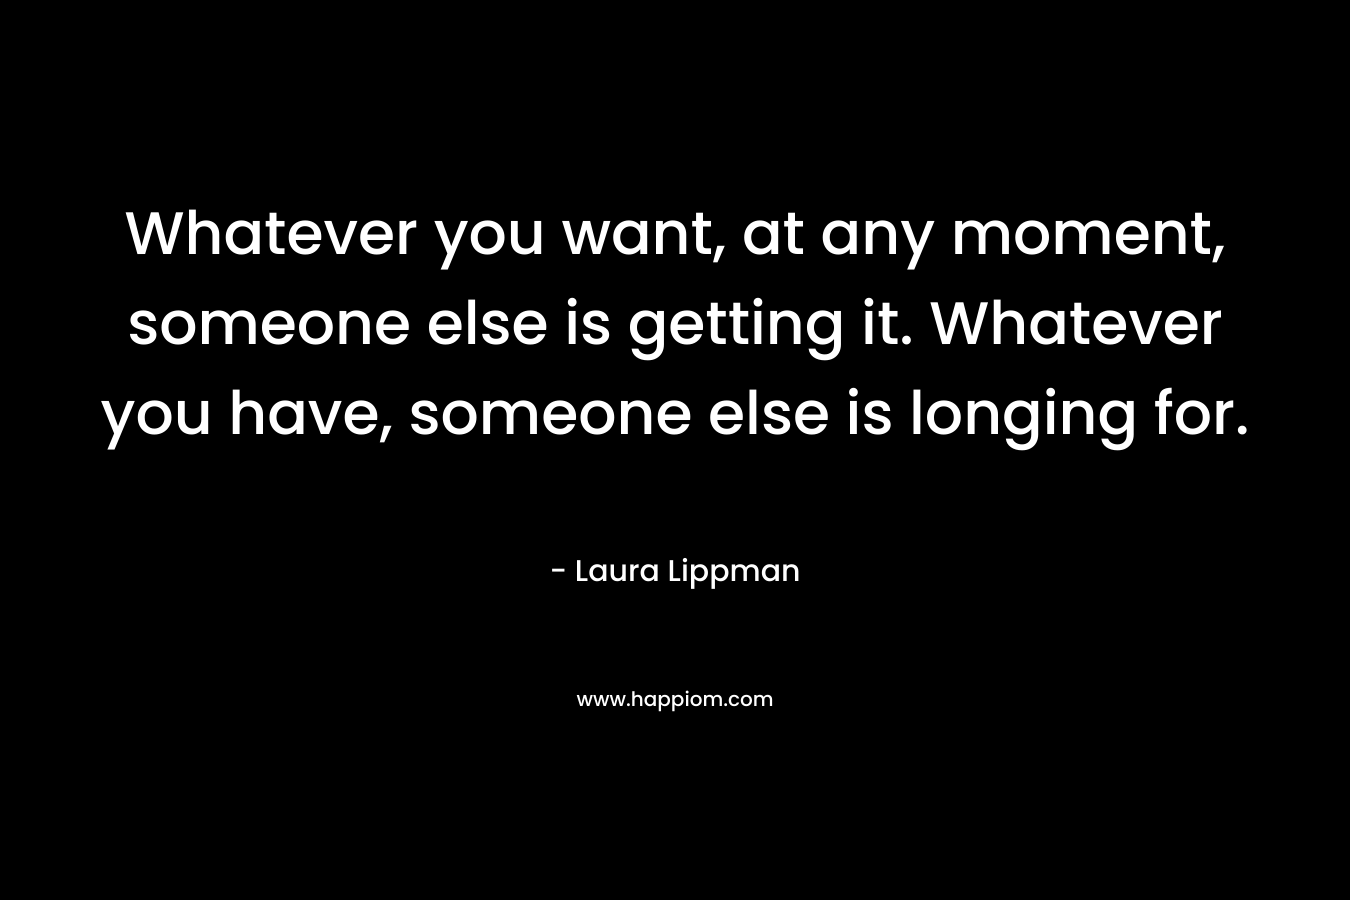 Whatever you want, at any moment, someone else is getting it. Whatever you have, someone else is longing for. – Laura Lippman